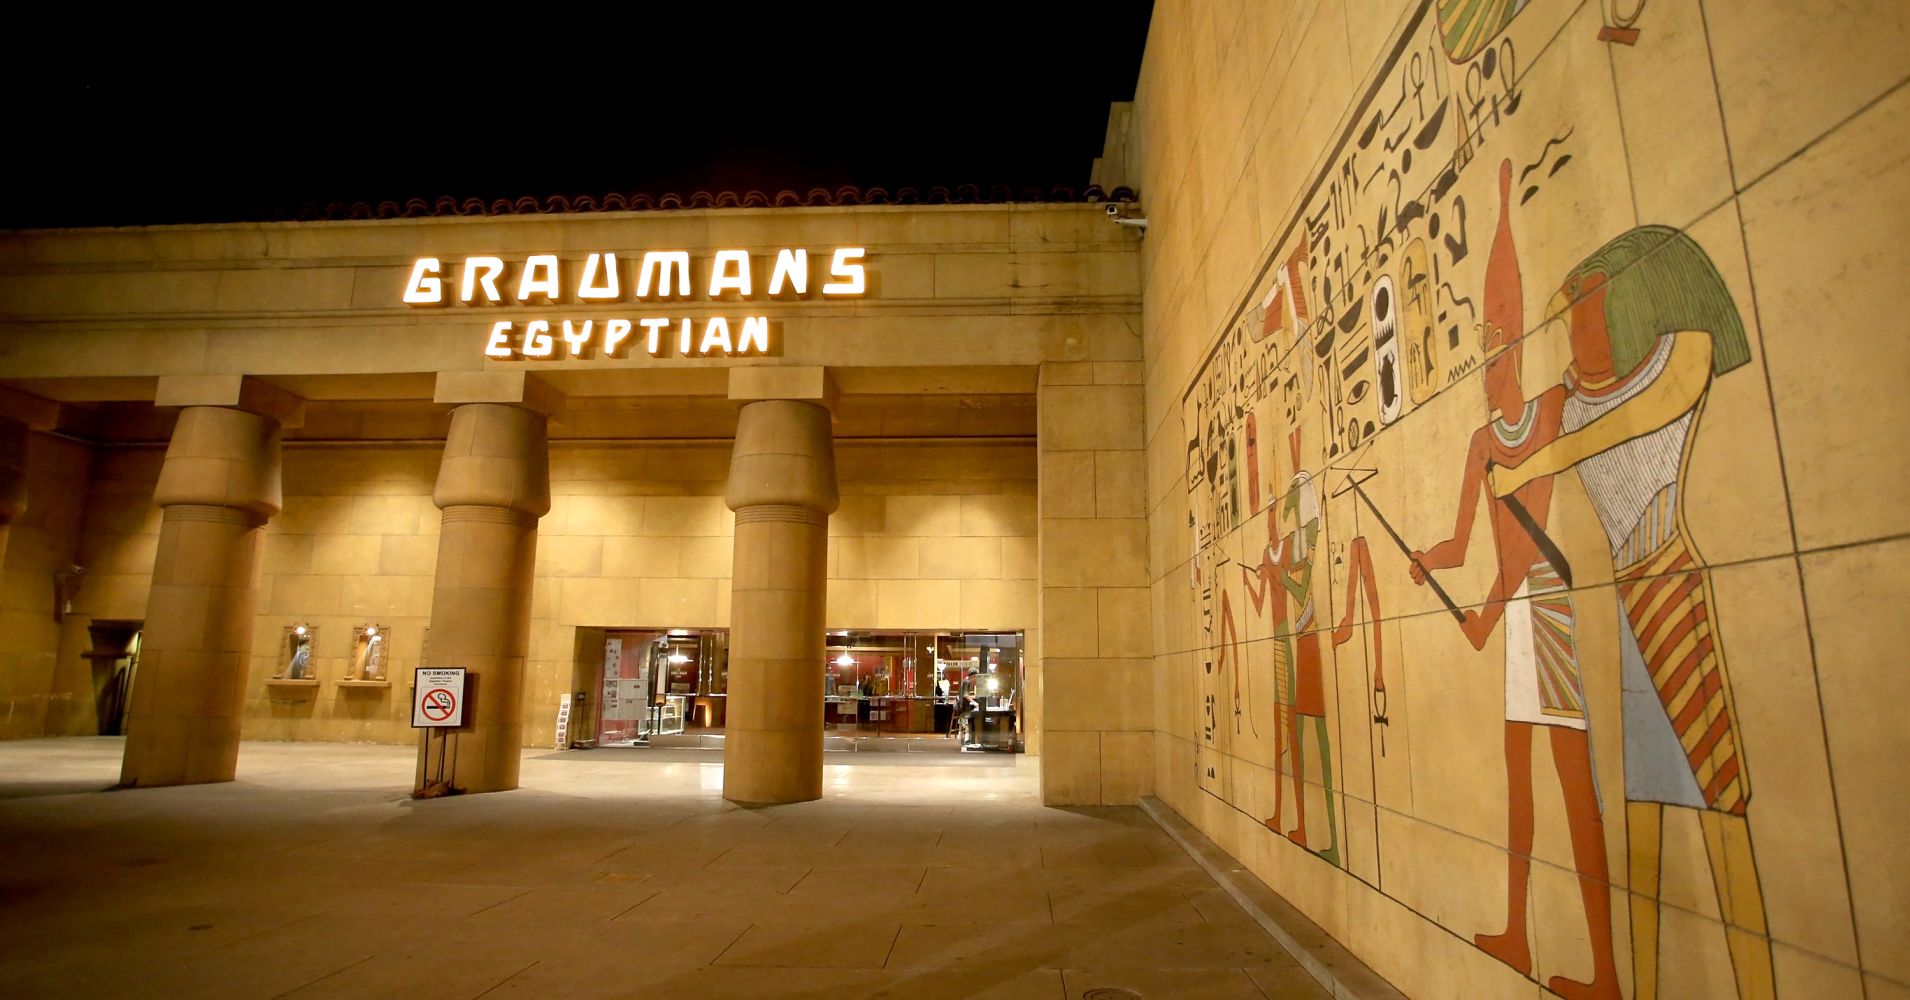 The Egyptian Theatre in Hollywood, California.